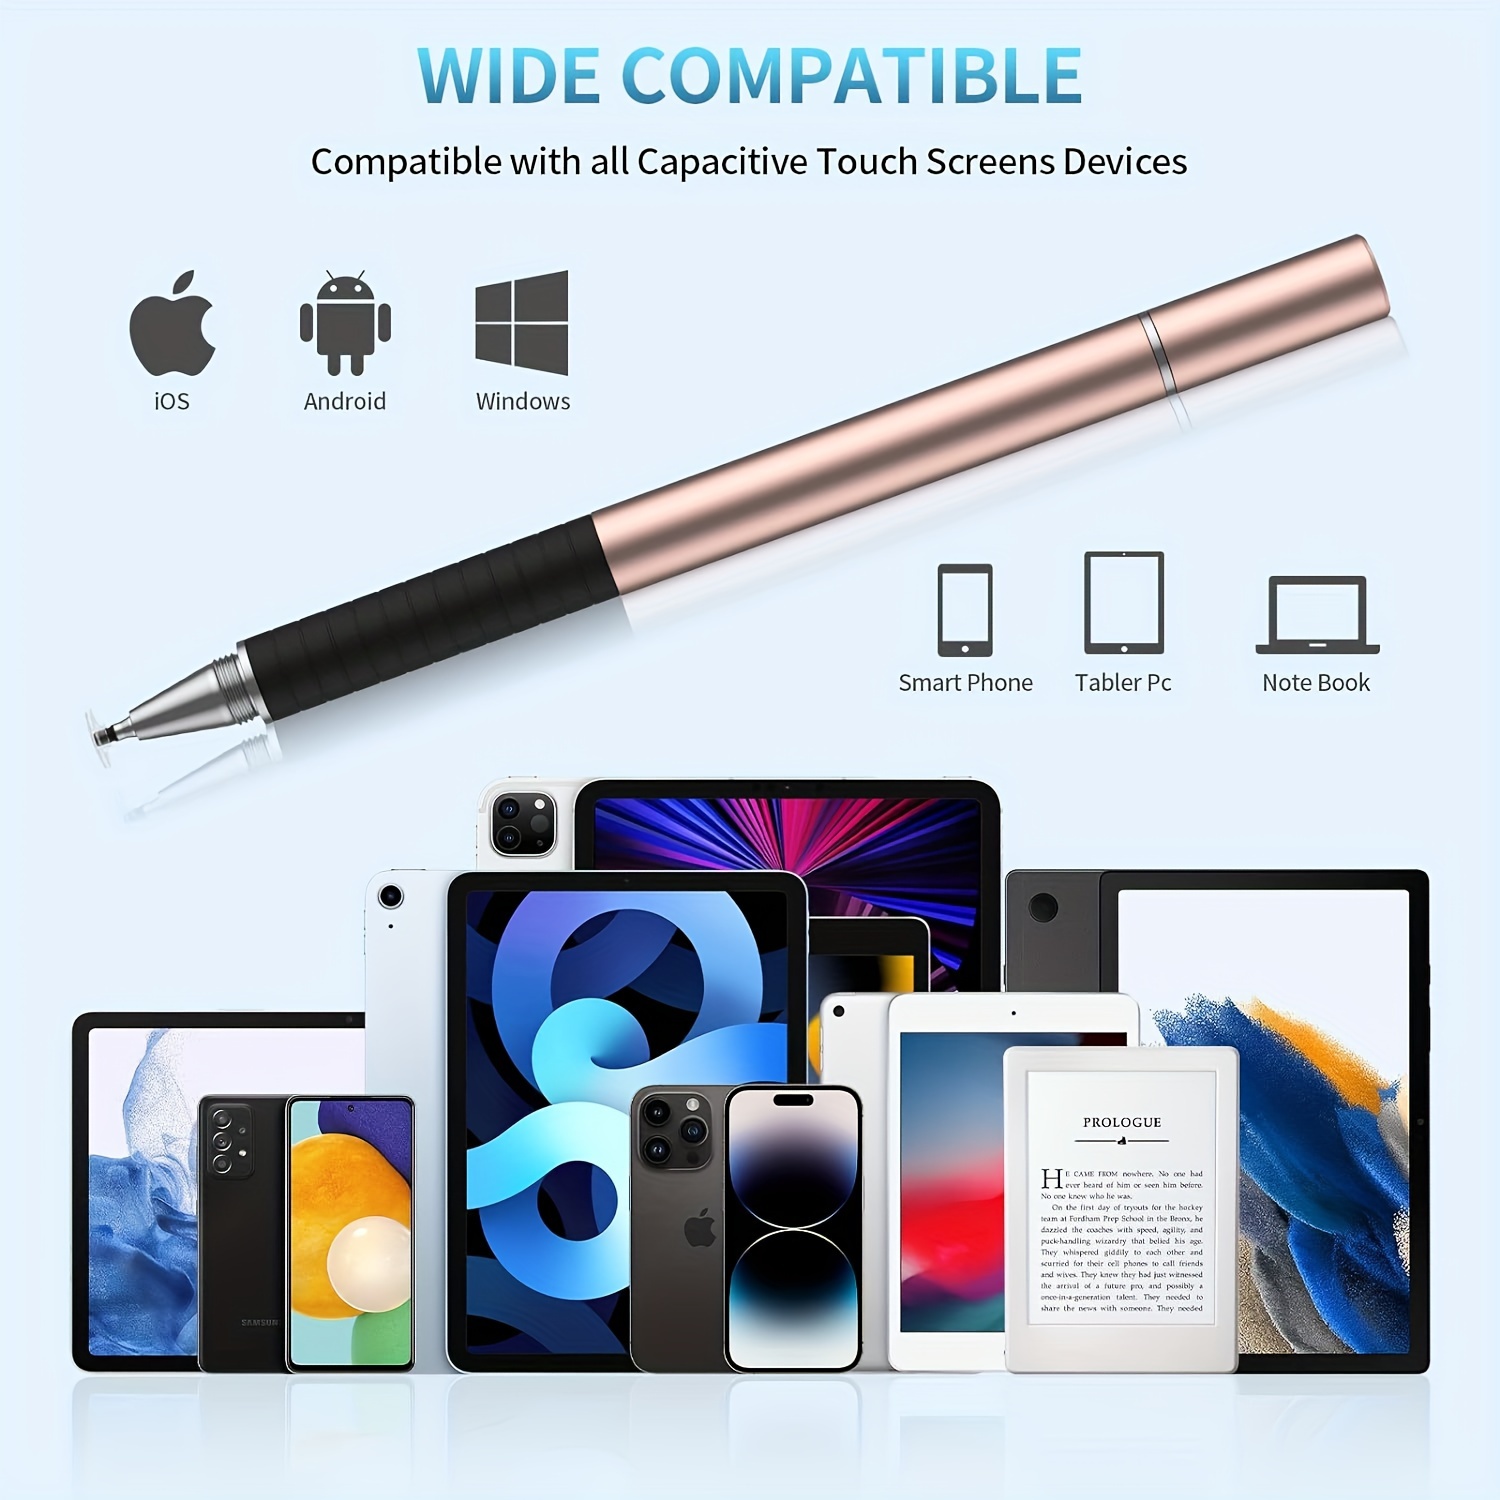 2 in 1 Screen Touch Stylus Pen For Tablet Mobile Android ios Phone iPad